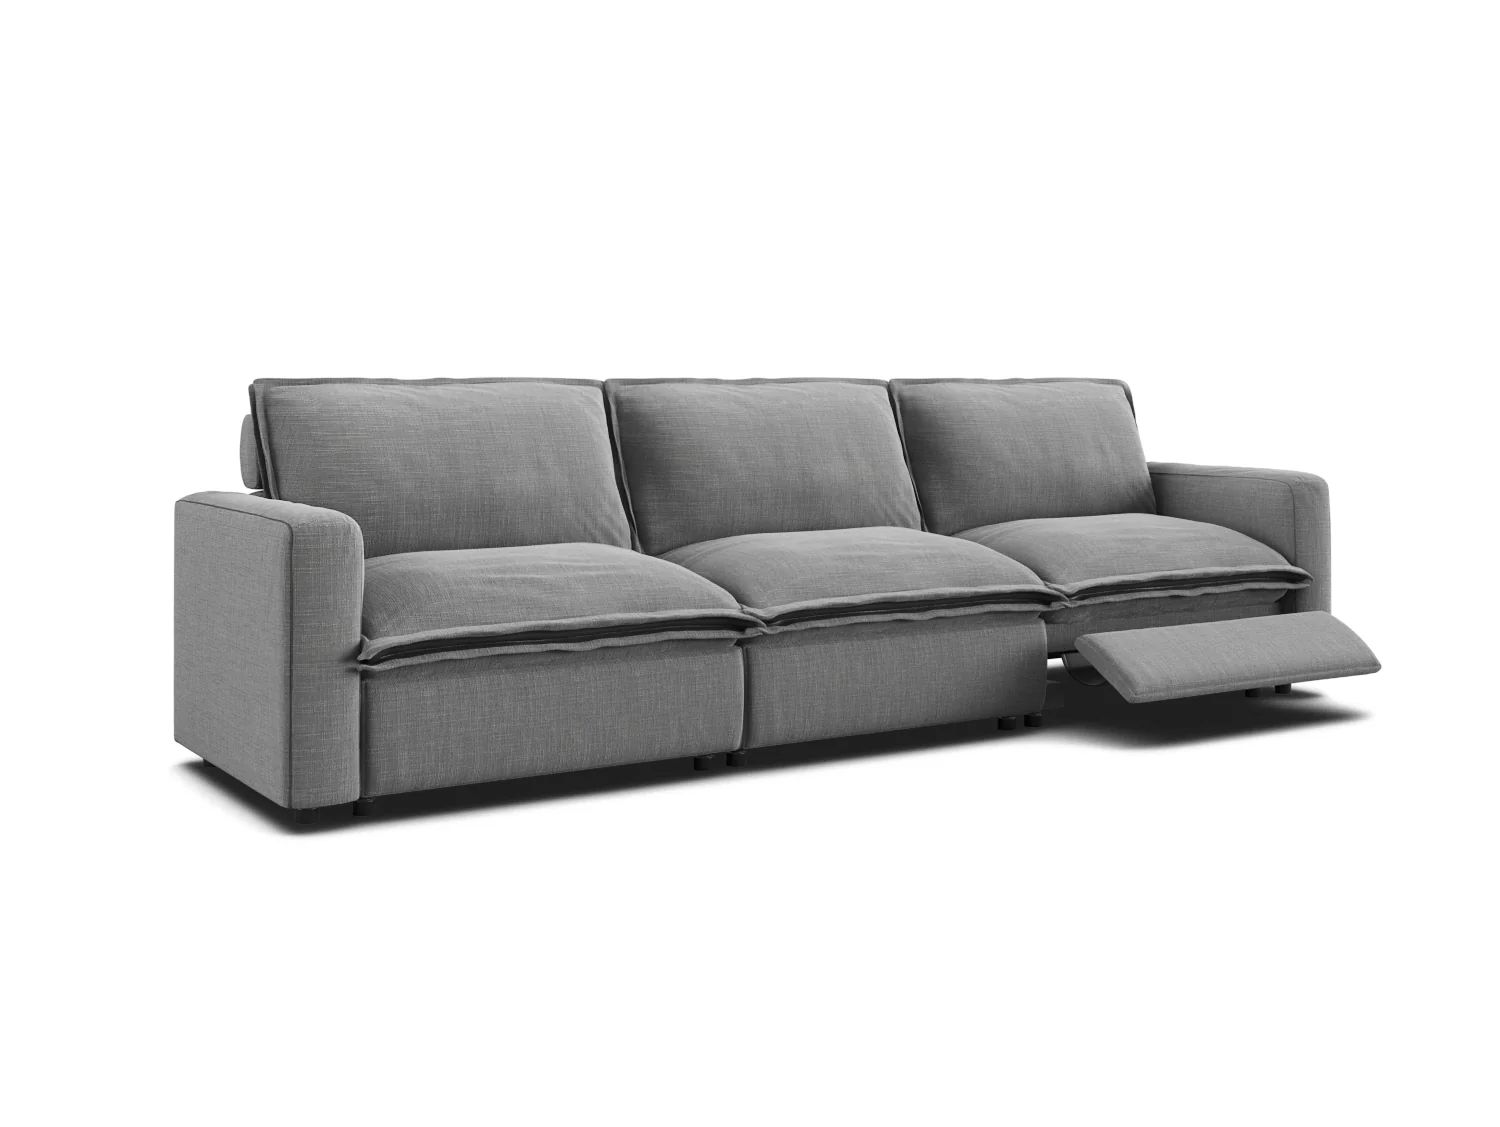 Gloomy Day In 3 Seat Sectional with 1 Recliner | Homebody